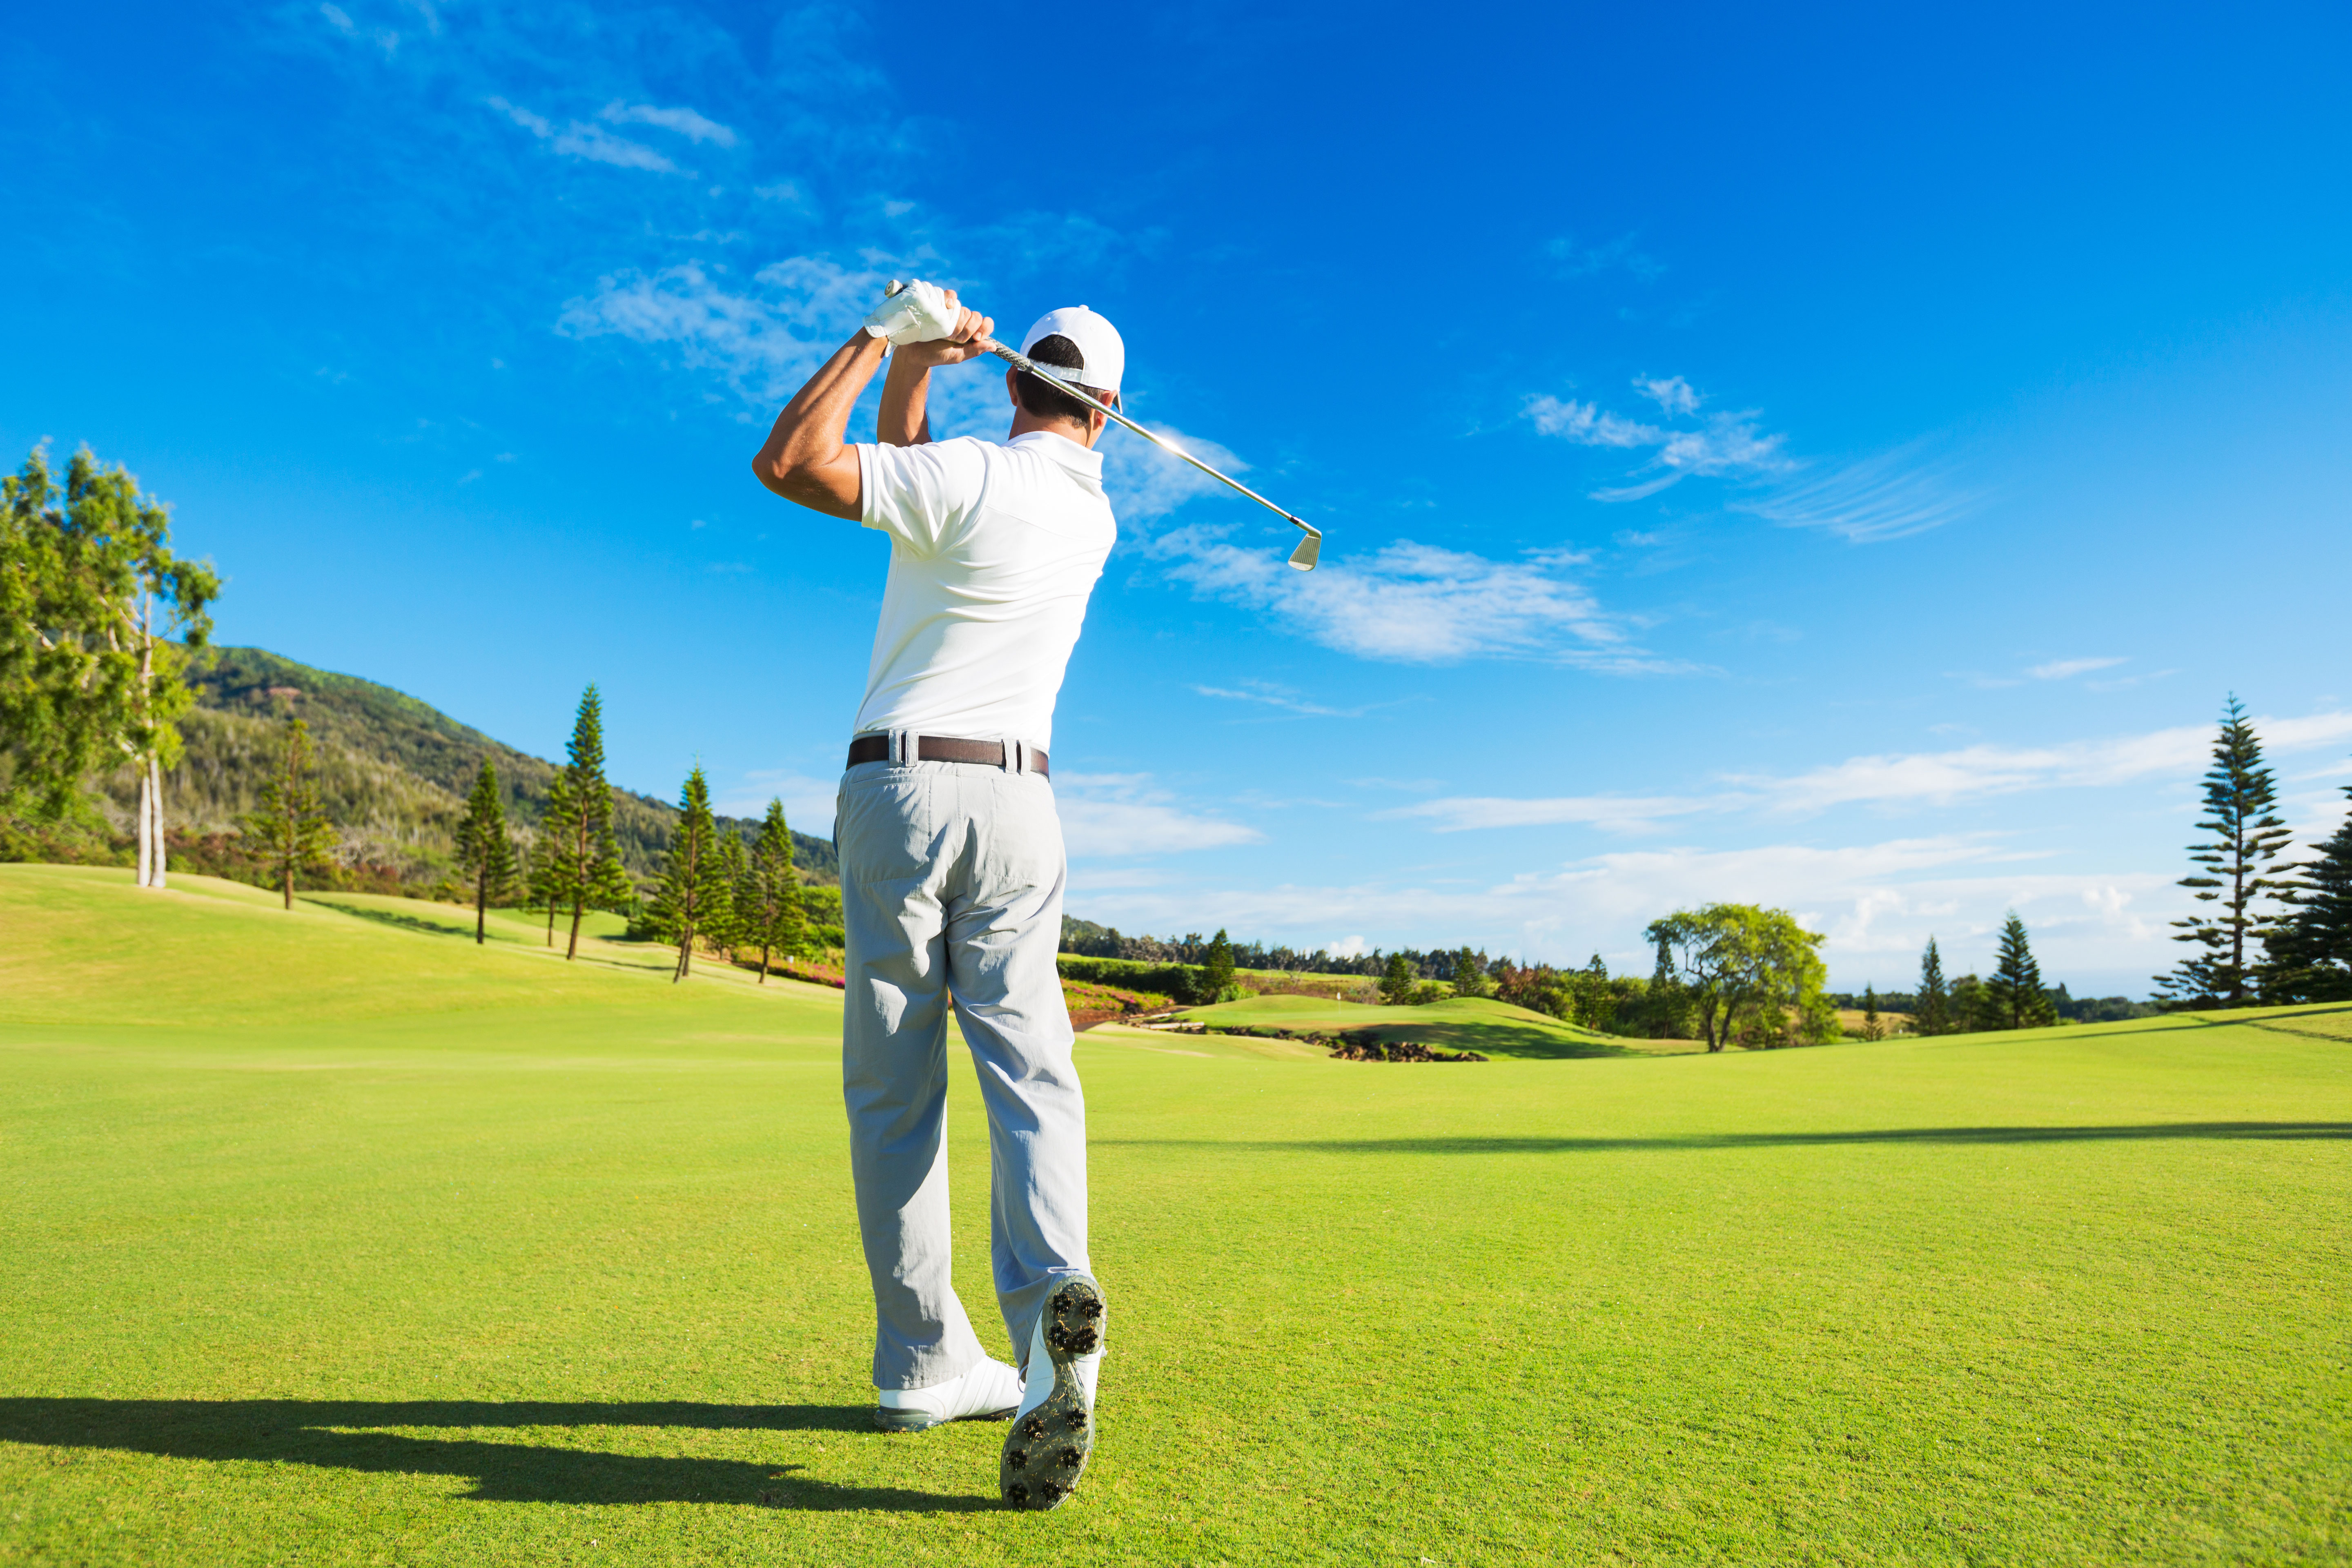 Overview of a Great Golf Swing | Golf Loopy - Play Your Golf Like a ...